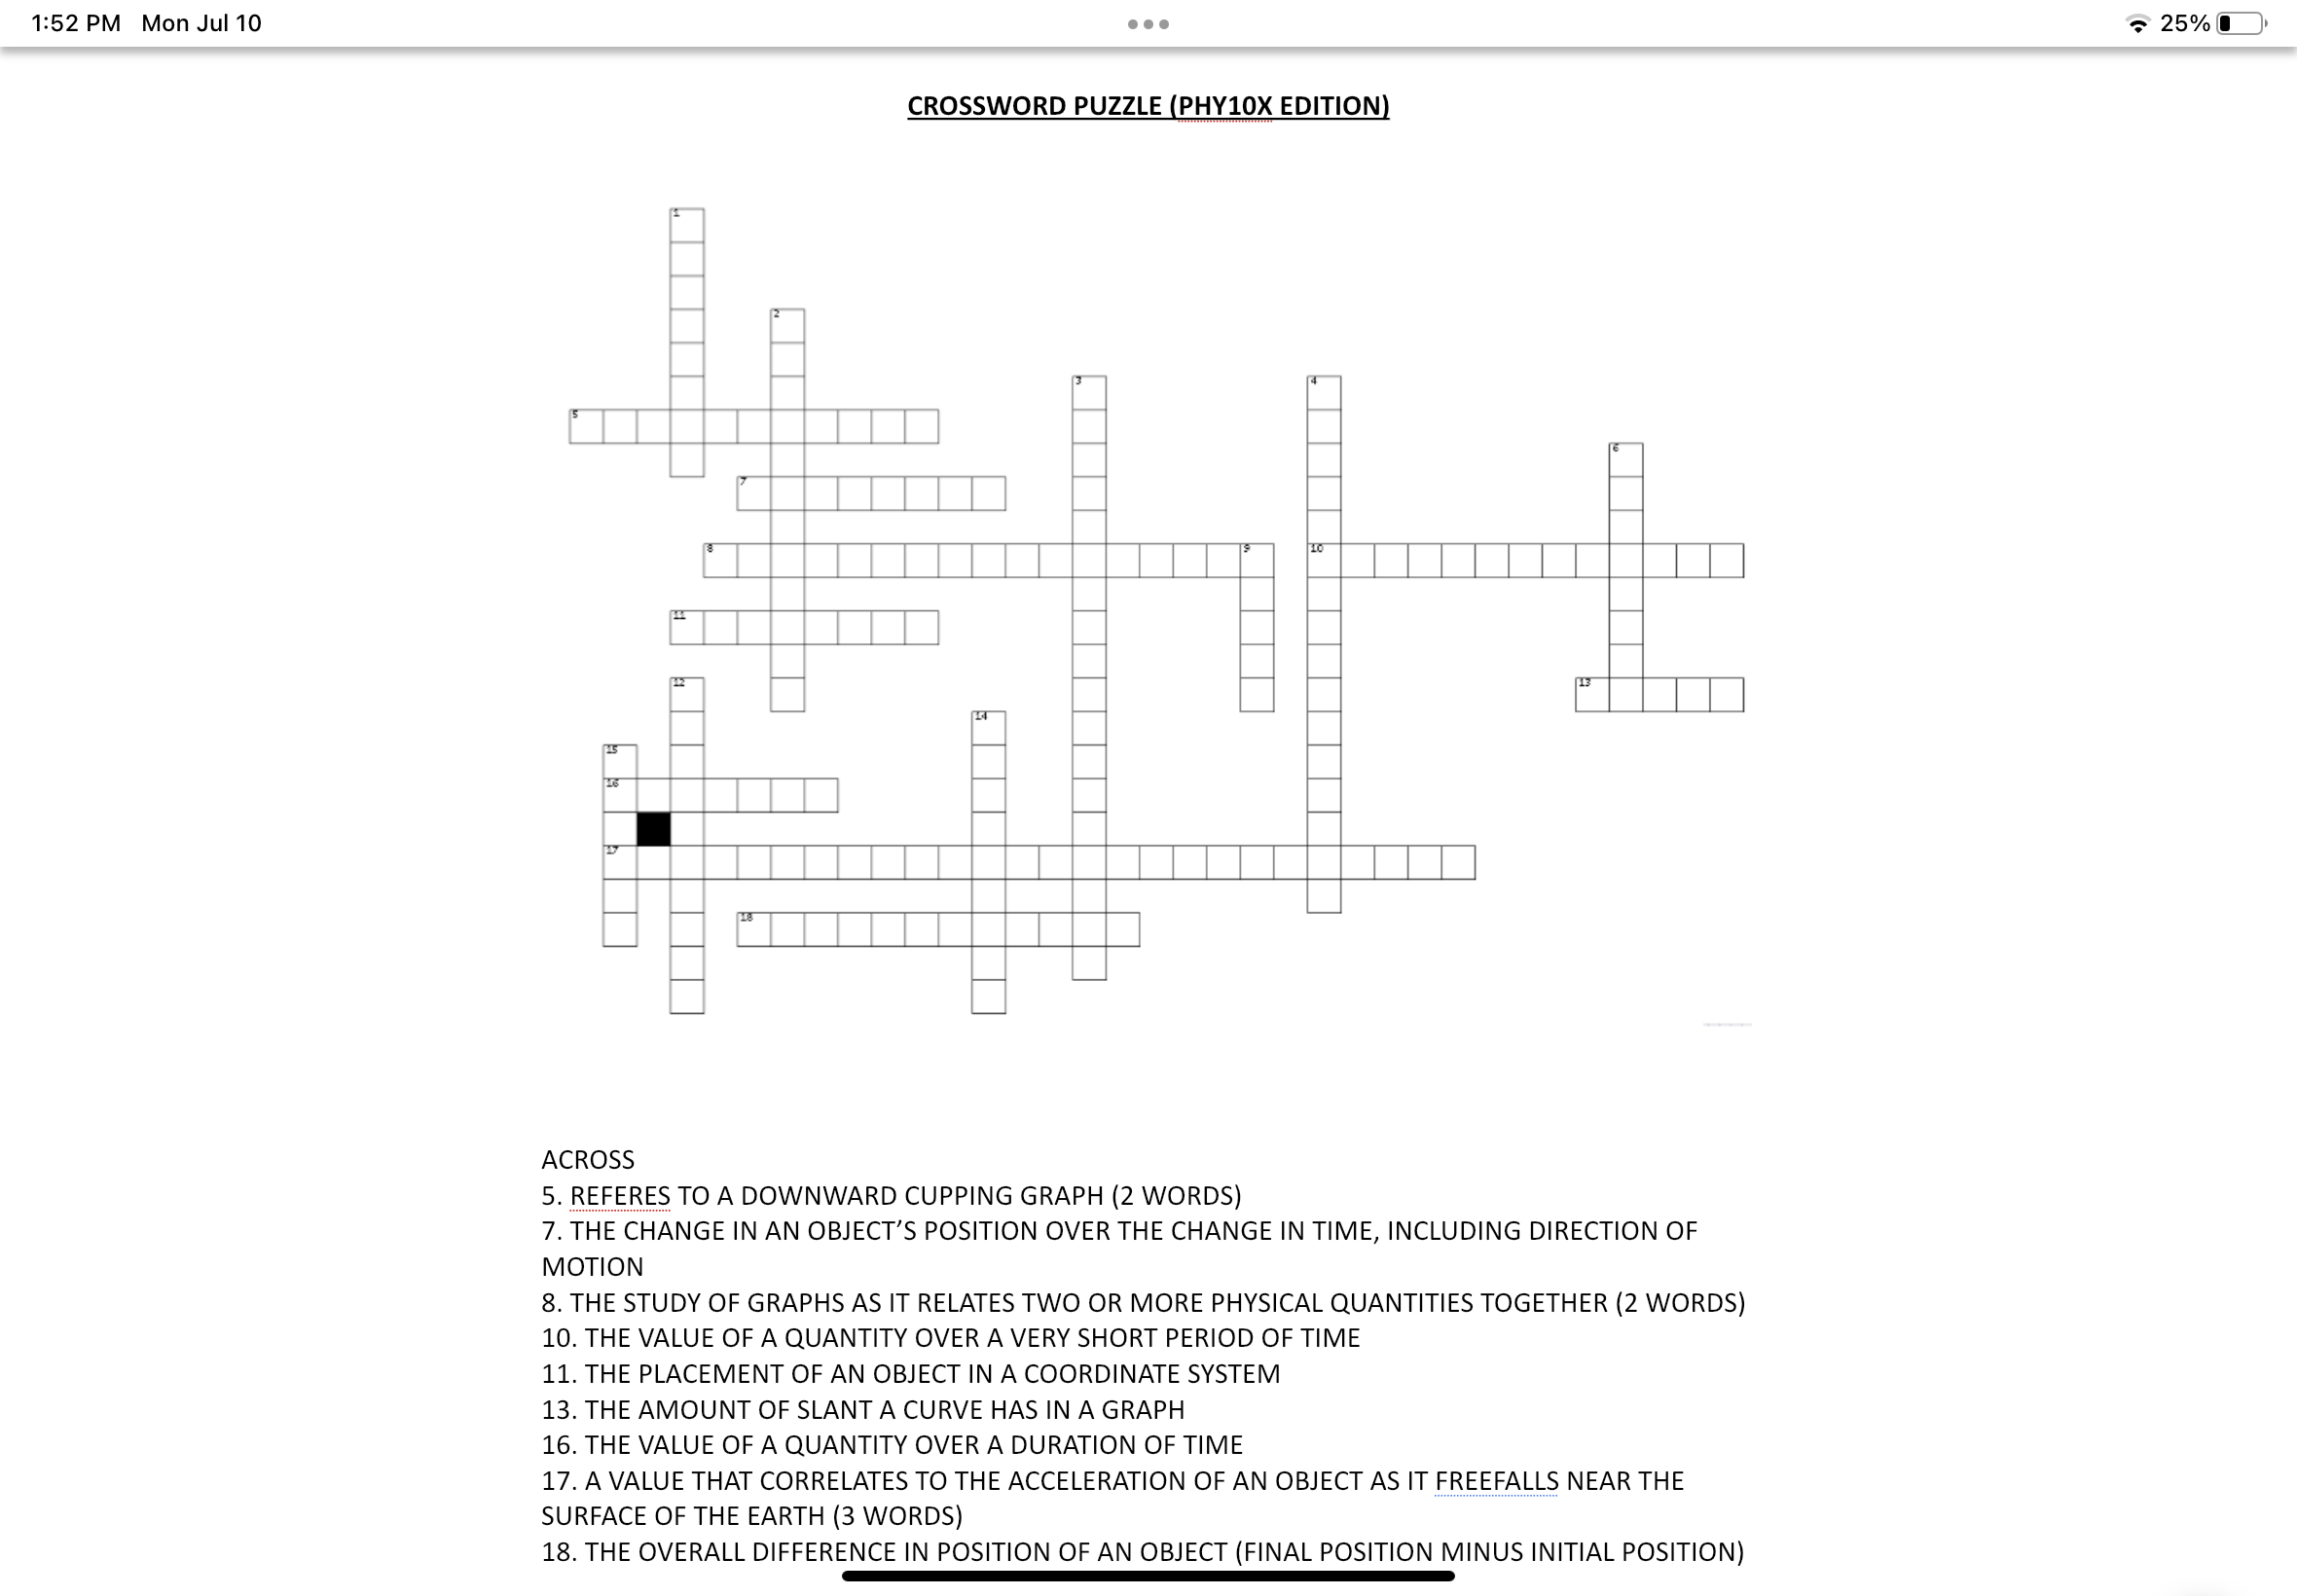 CROSSWORD PUZZLE (PHY10X EDITION) ACROSS 5 REFERES Chegg com